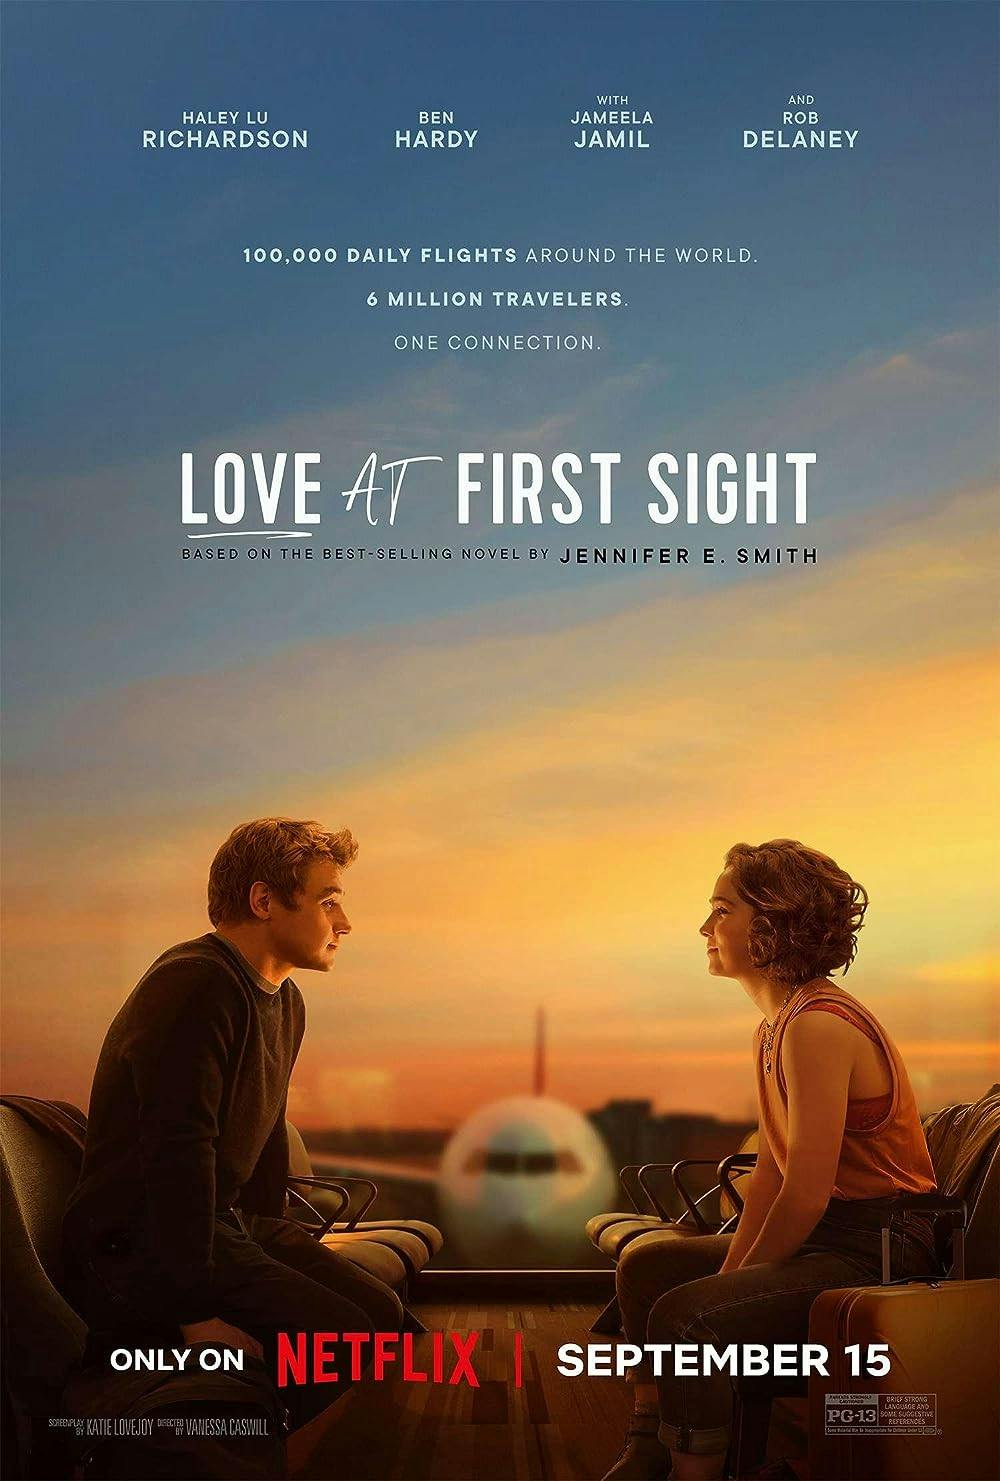 Review: ‘Love at First Sight’ is a cliché, lighthearted romantic comedy